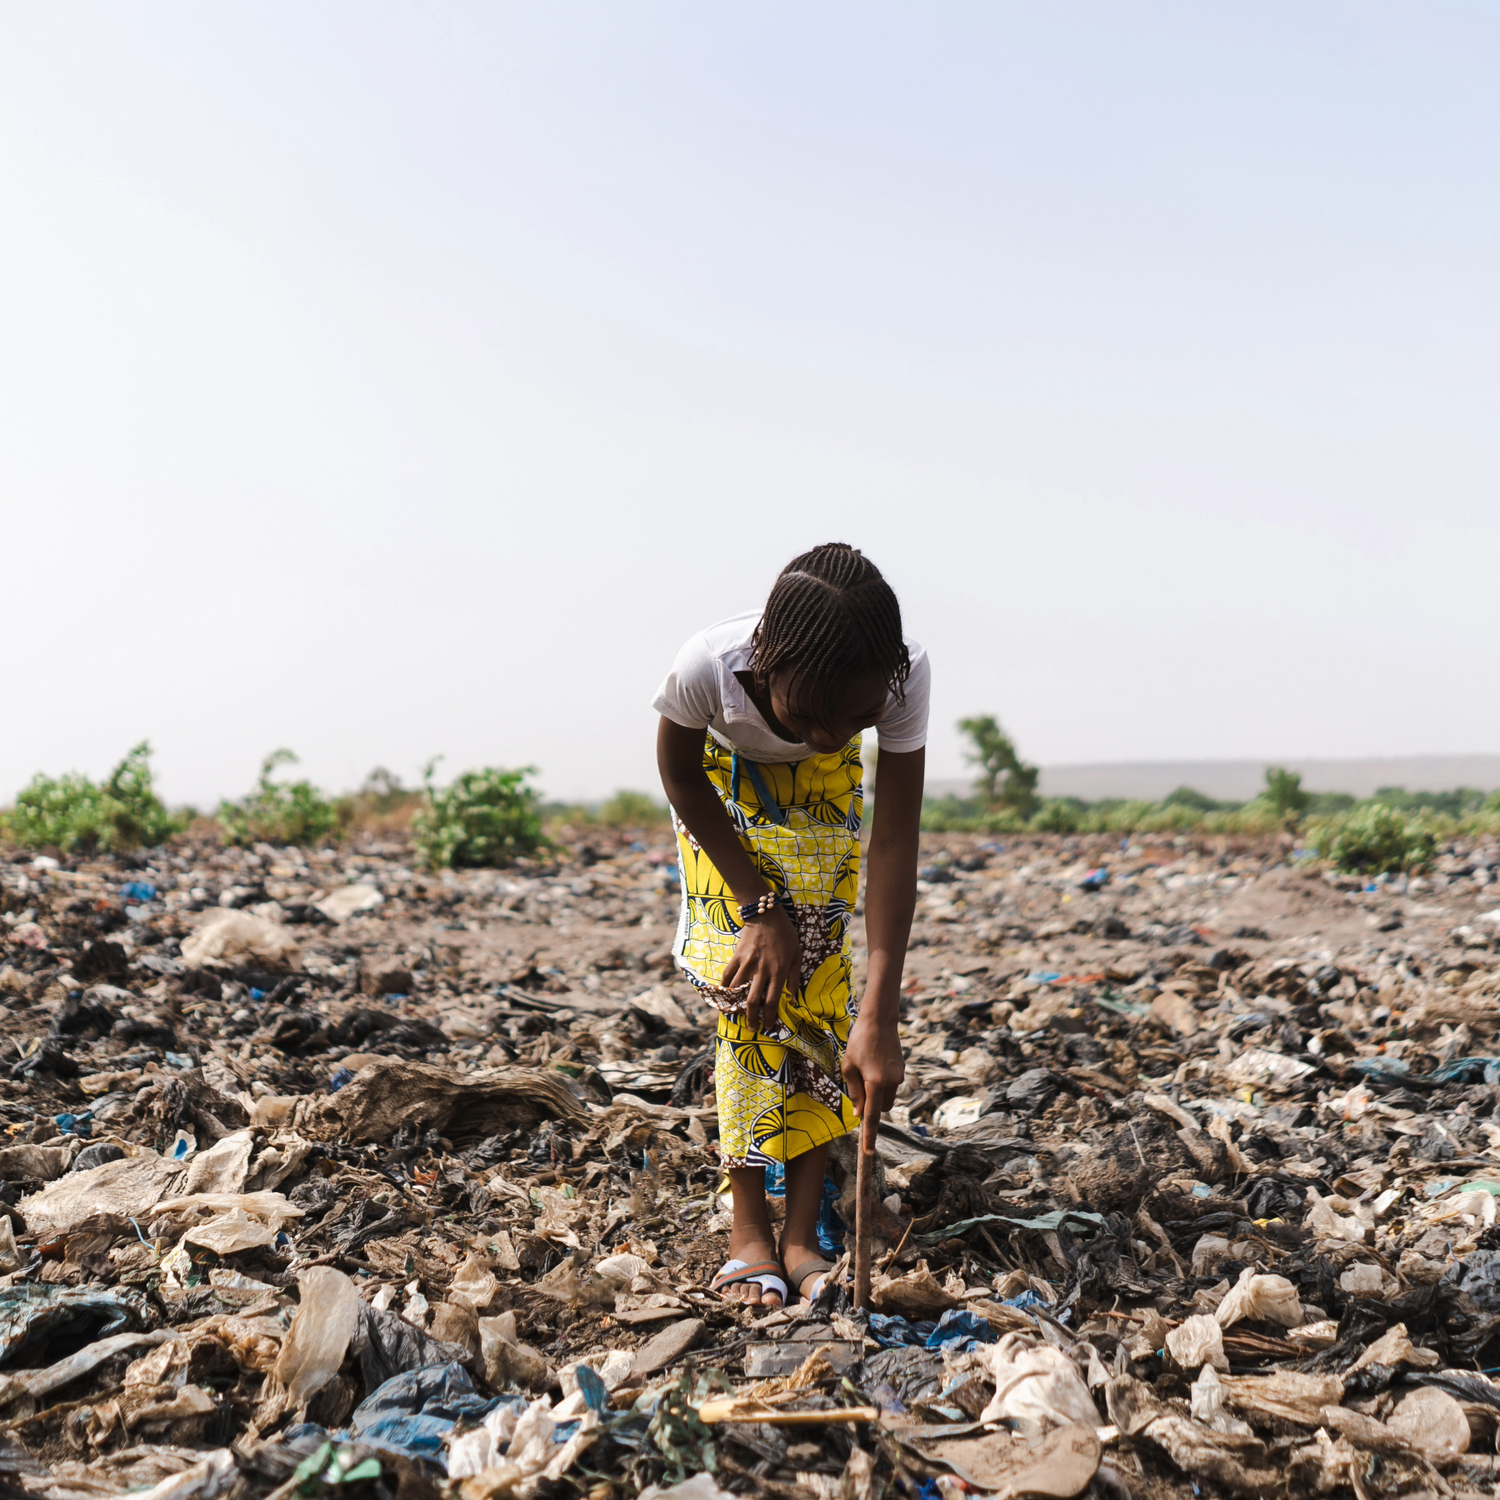 A young child standing in the center of plastic pollution in her environment. She pokes the towering pile of waste with a stick.